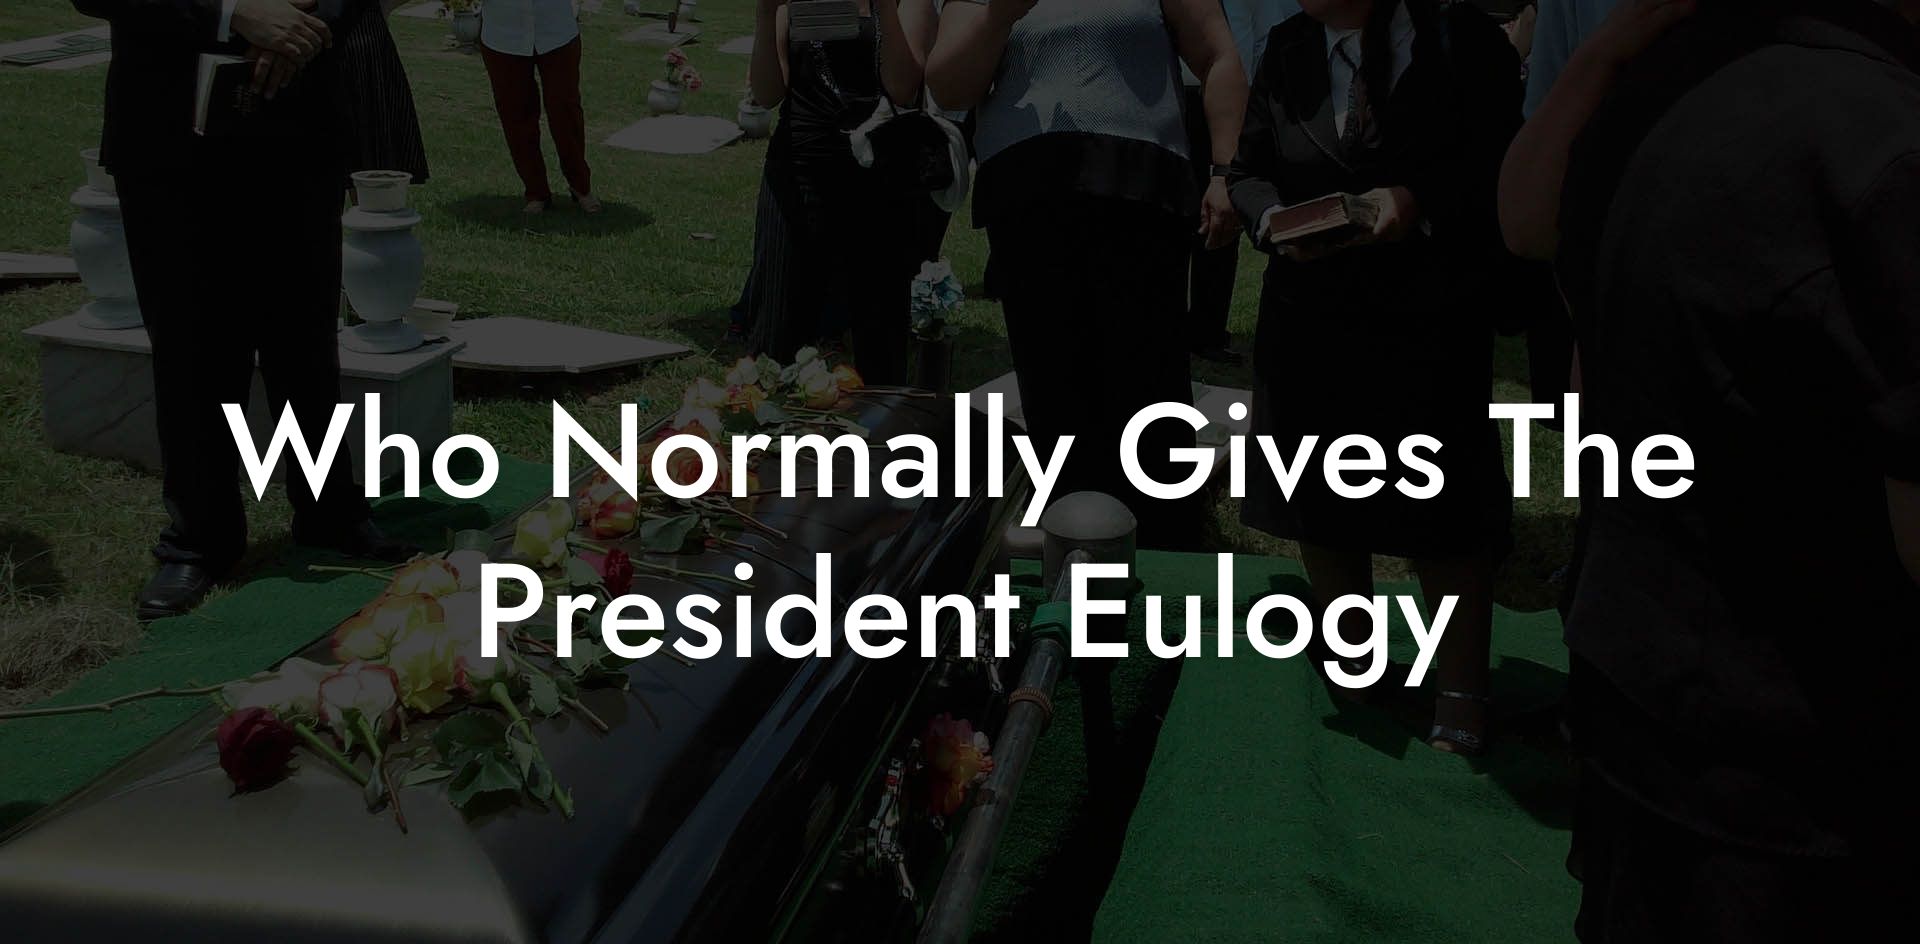 Who Normally Gives The President Eulogy